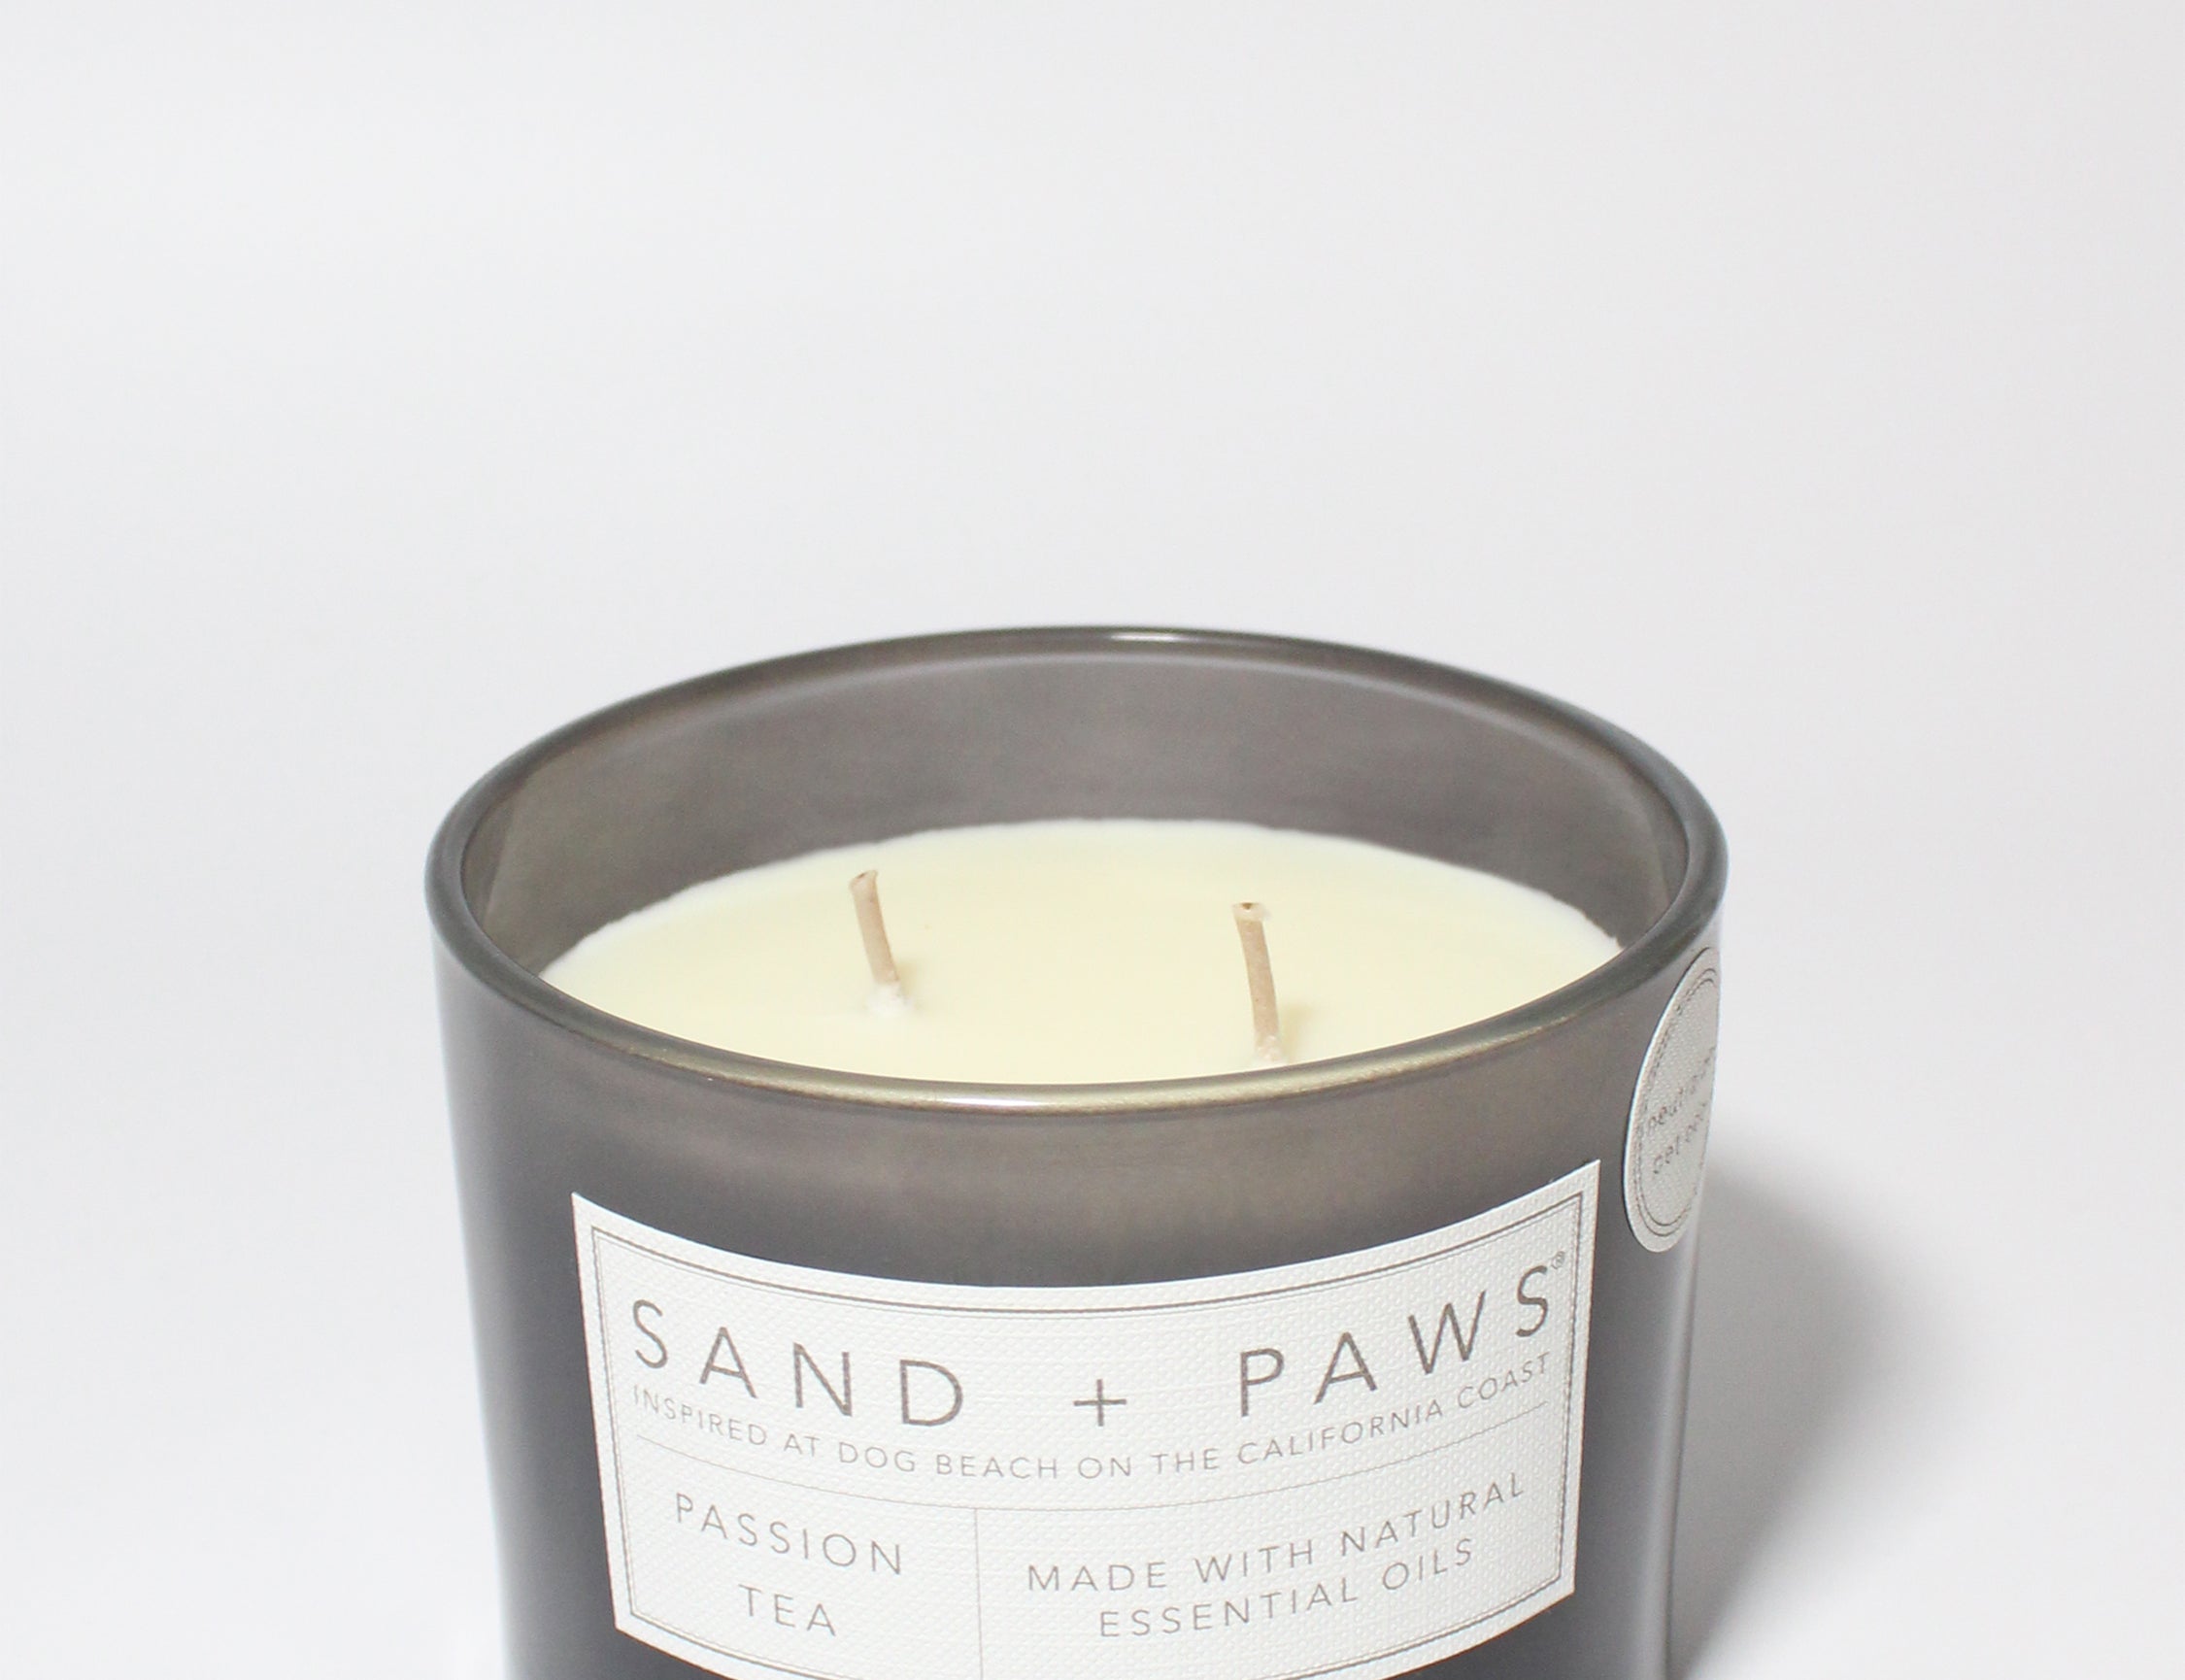 Sand + Paws Passion Tea 12 oz scented candle Tornado vessel with Black Dog Lid